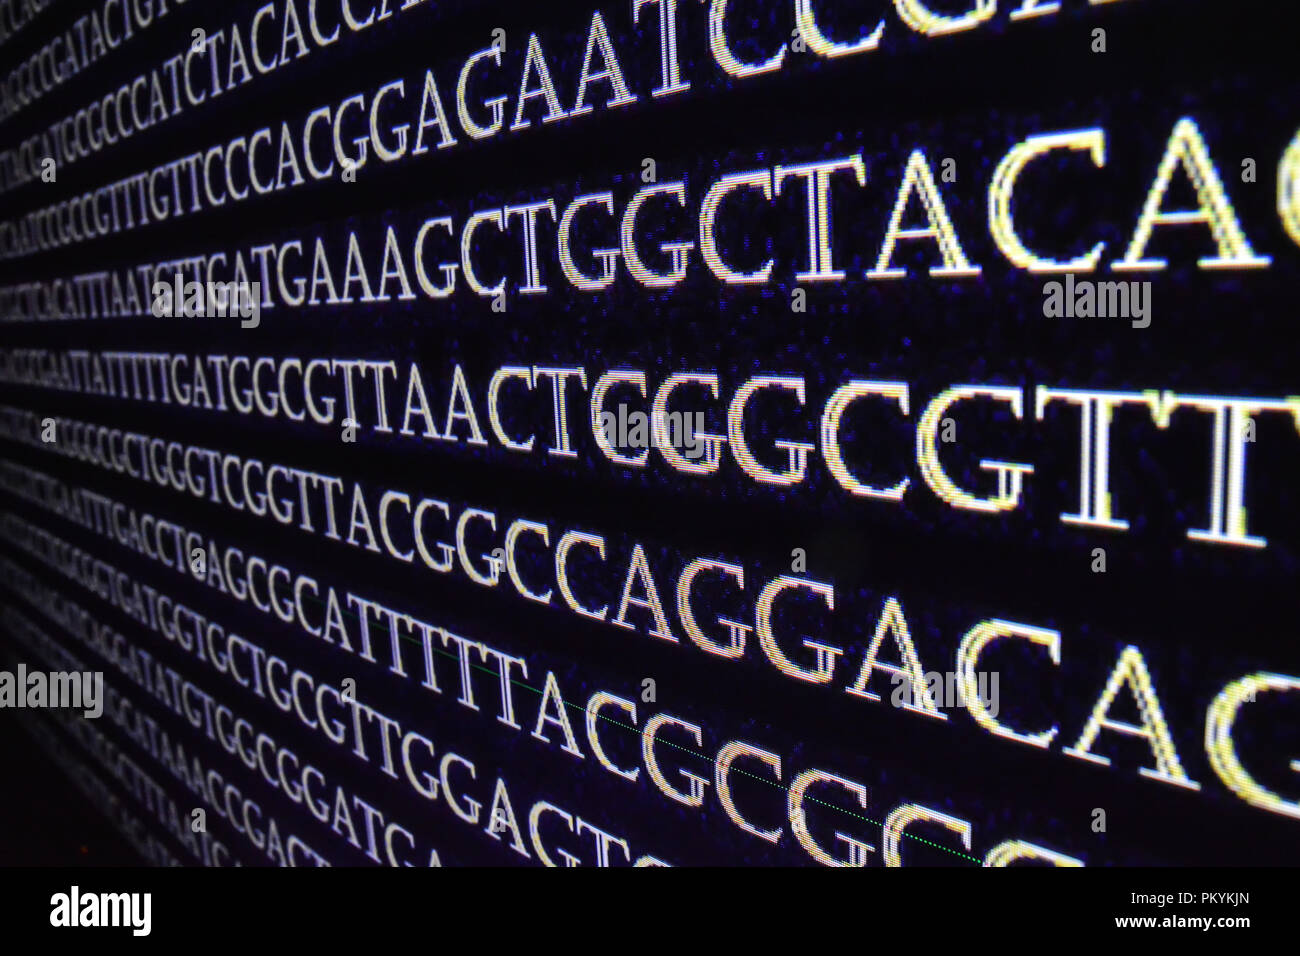 Genomic sequencing. The sequence of nucleotide bases in DNA. Stock Photo